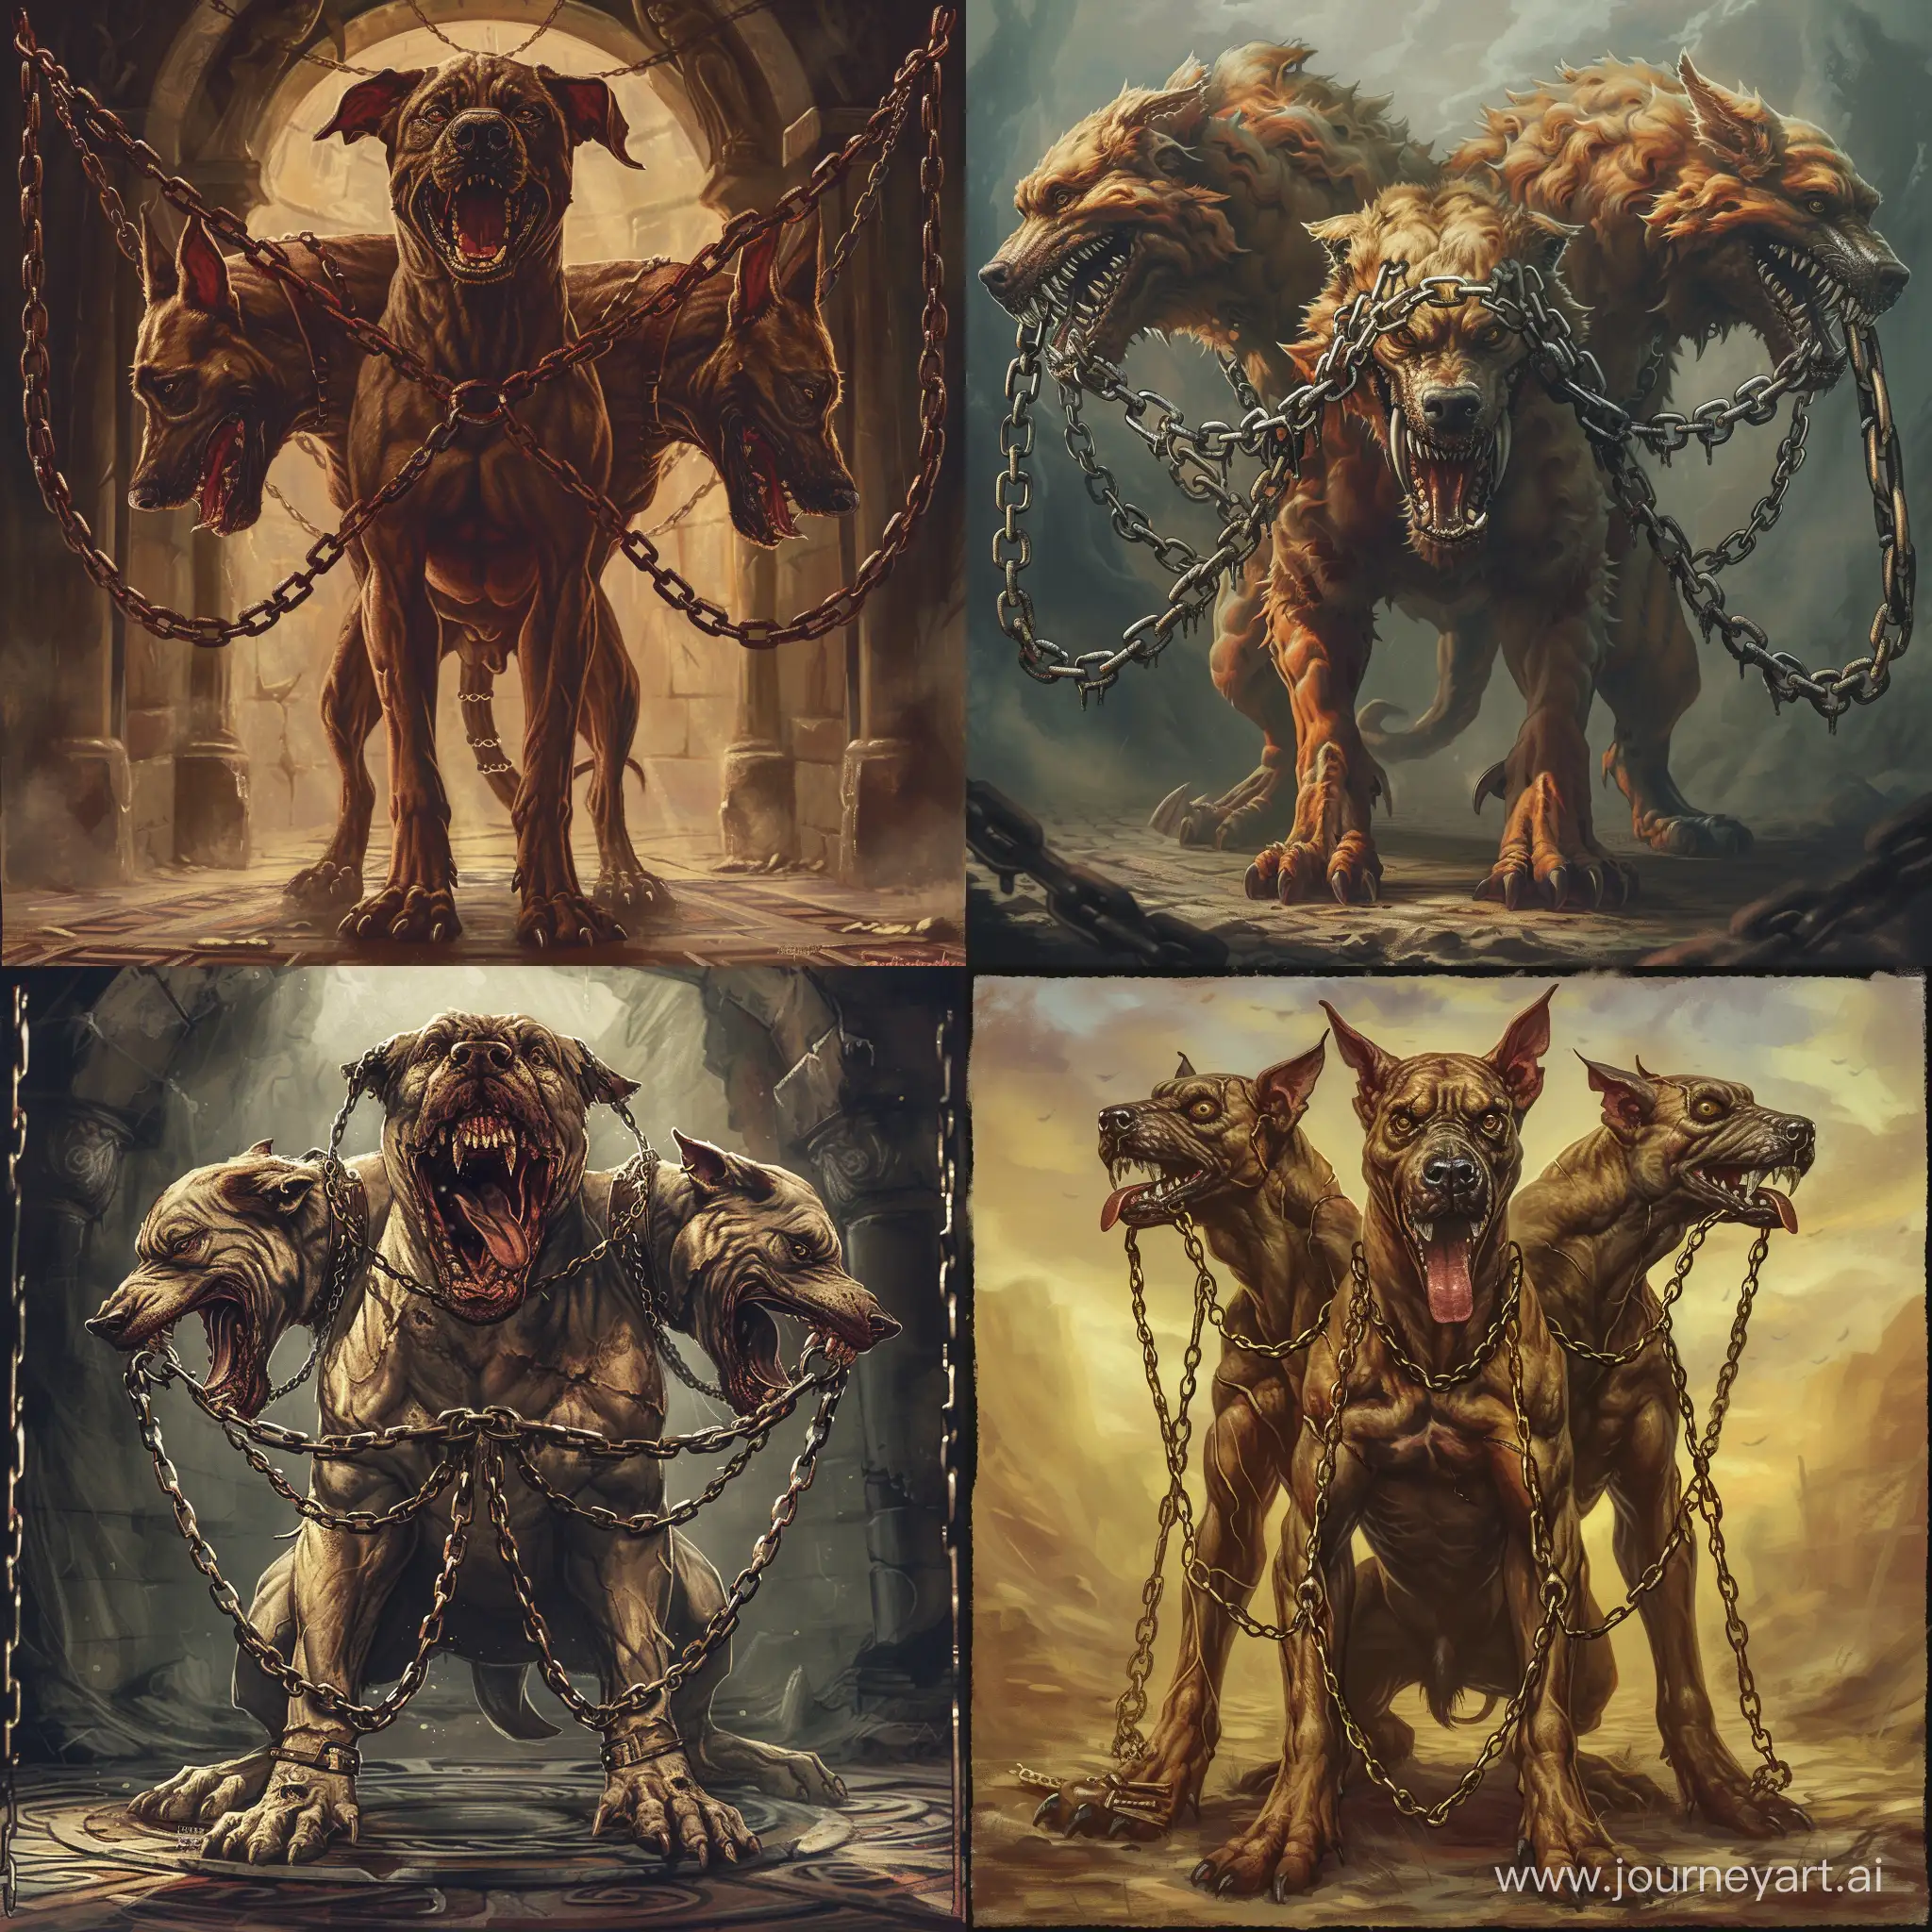 Surreal-Digital-Art-of-Cerberus-ThreeHeaded-Guardian-Dog-Bound-by-Holy-Chains